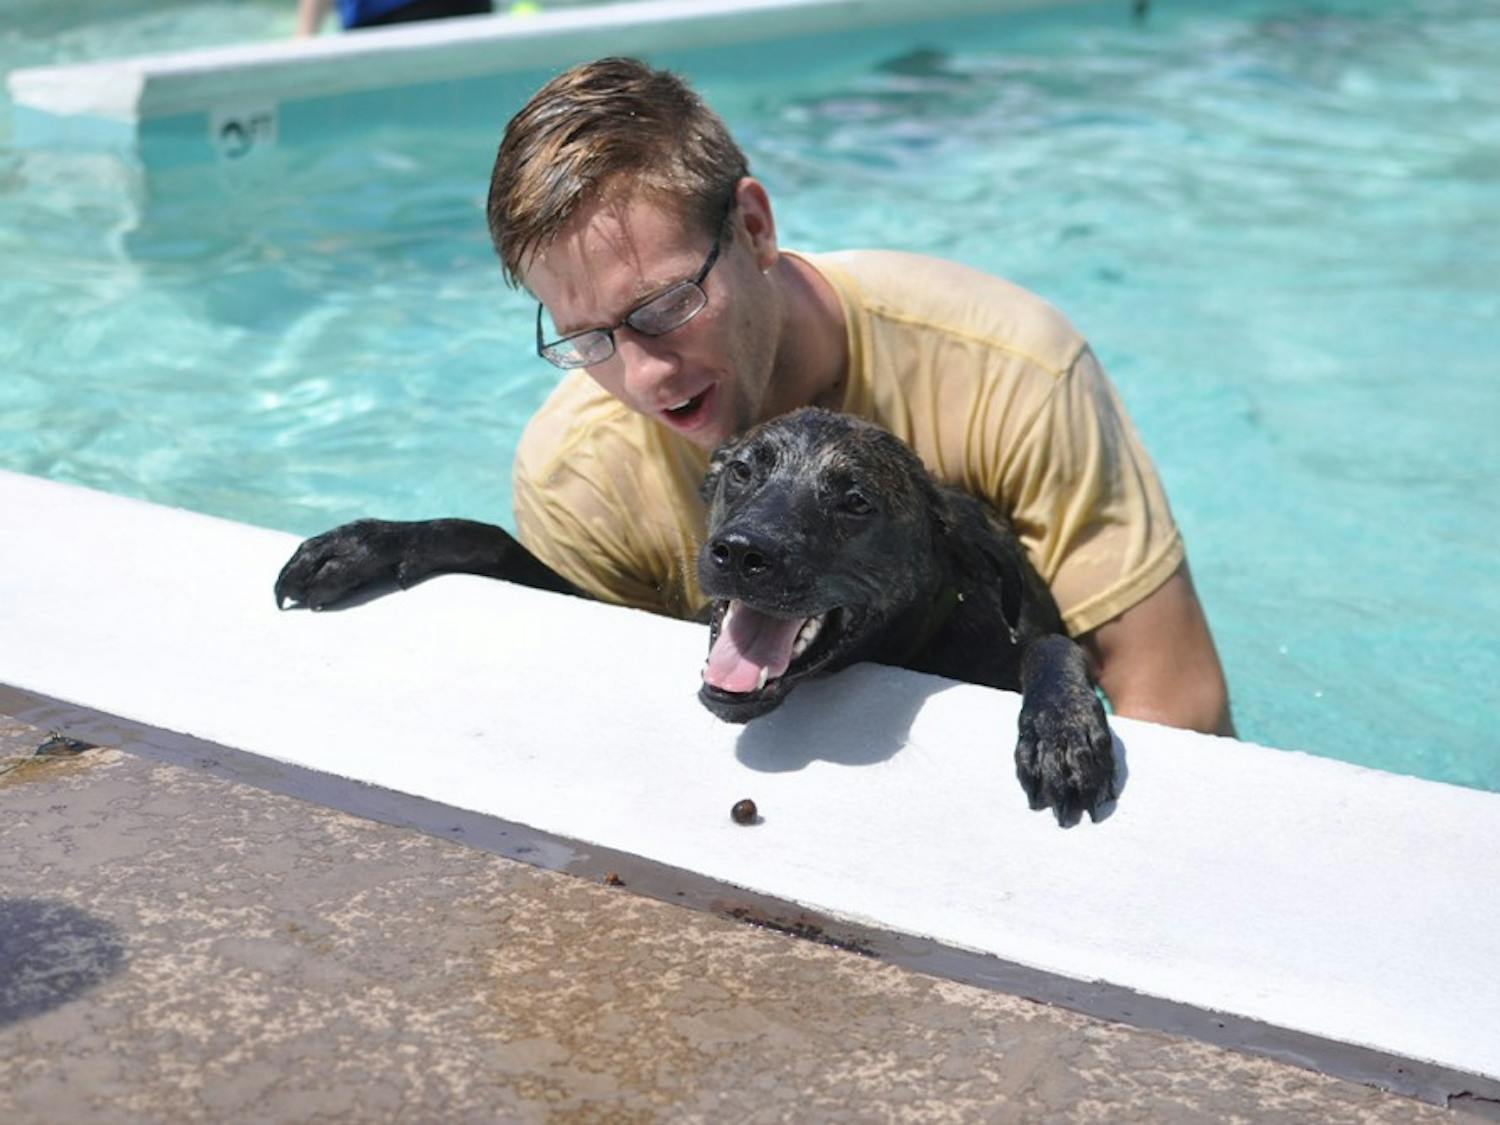 Jeff Lansford, a first year medical student at UNC, plays with 9-month-old Boxer mix Moose Sunday afternoon at Hargraves Community Center's A.D. Clark Pool.